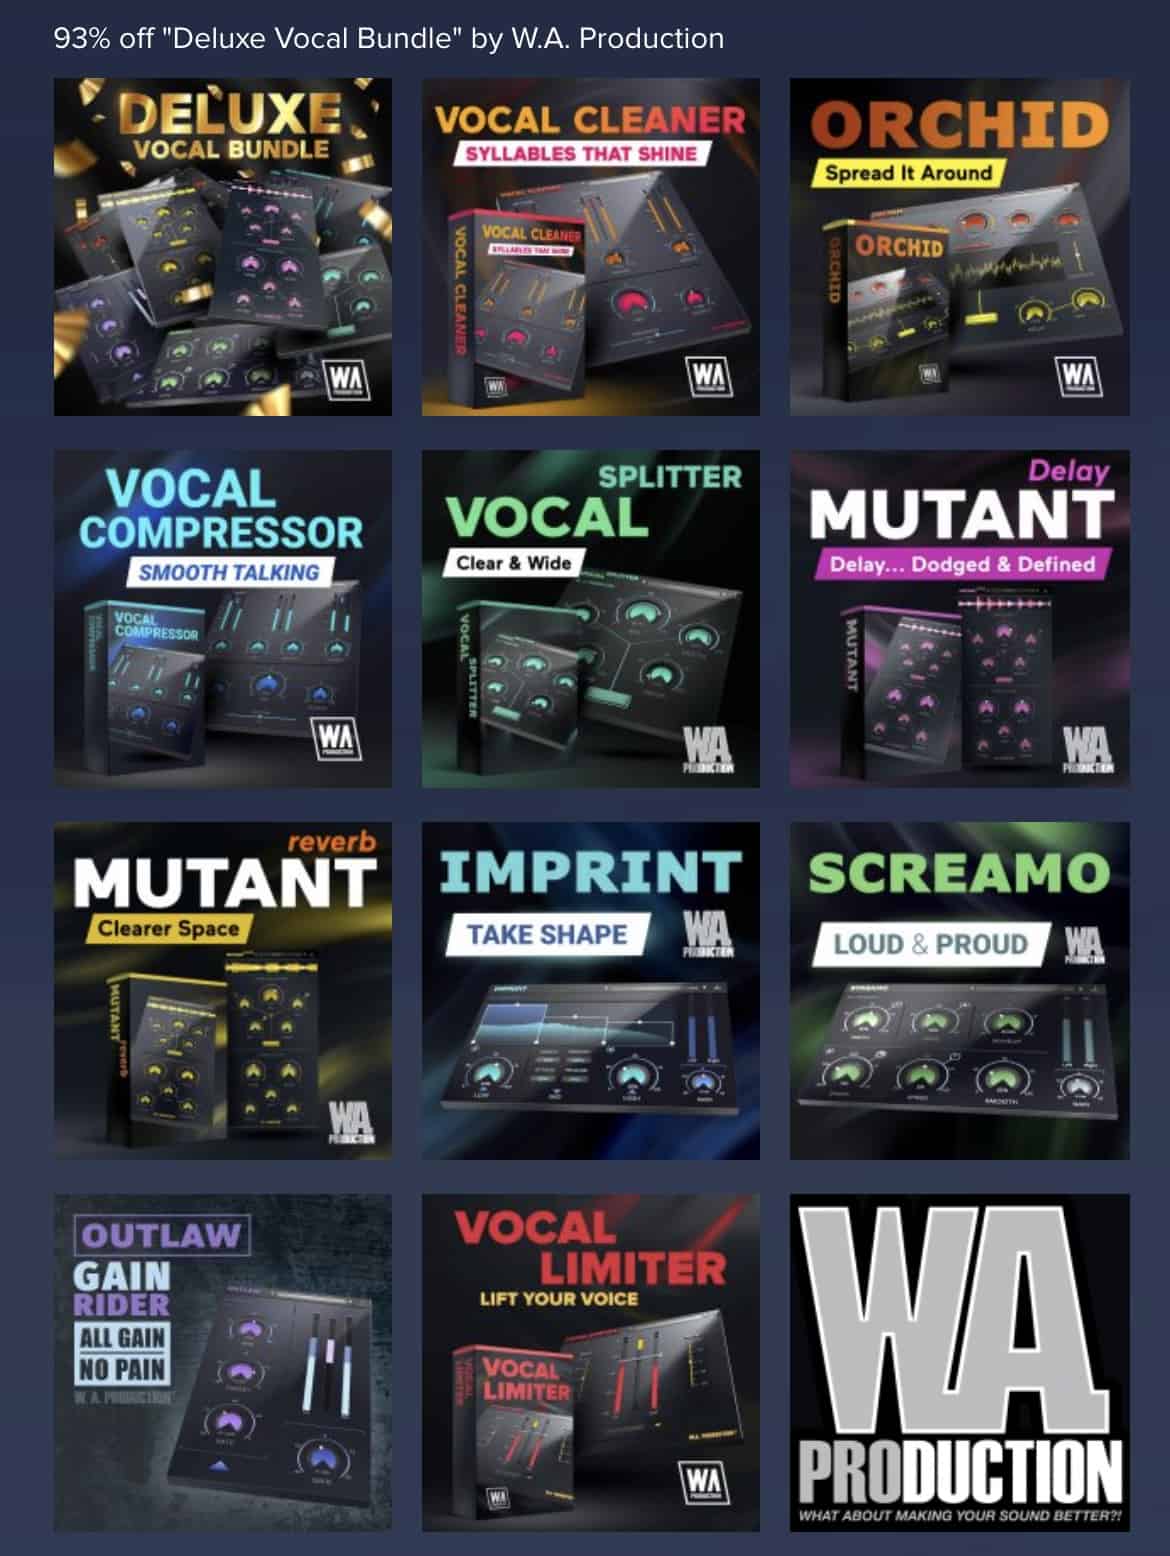 93-off-Deluxe-Vocal-Bundle-by-W.A.-Production-the-Ultimate-Vocal-Production-Bundle